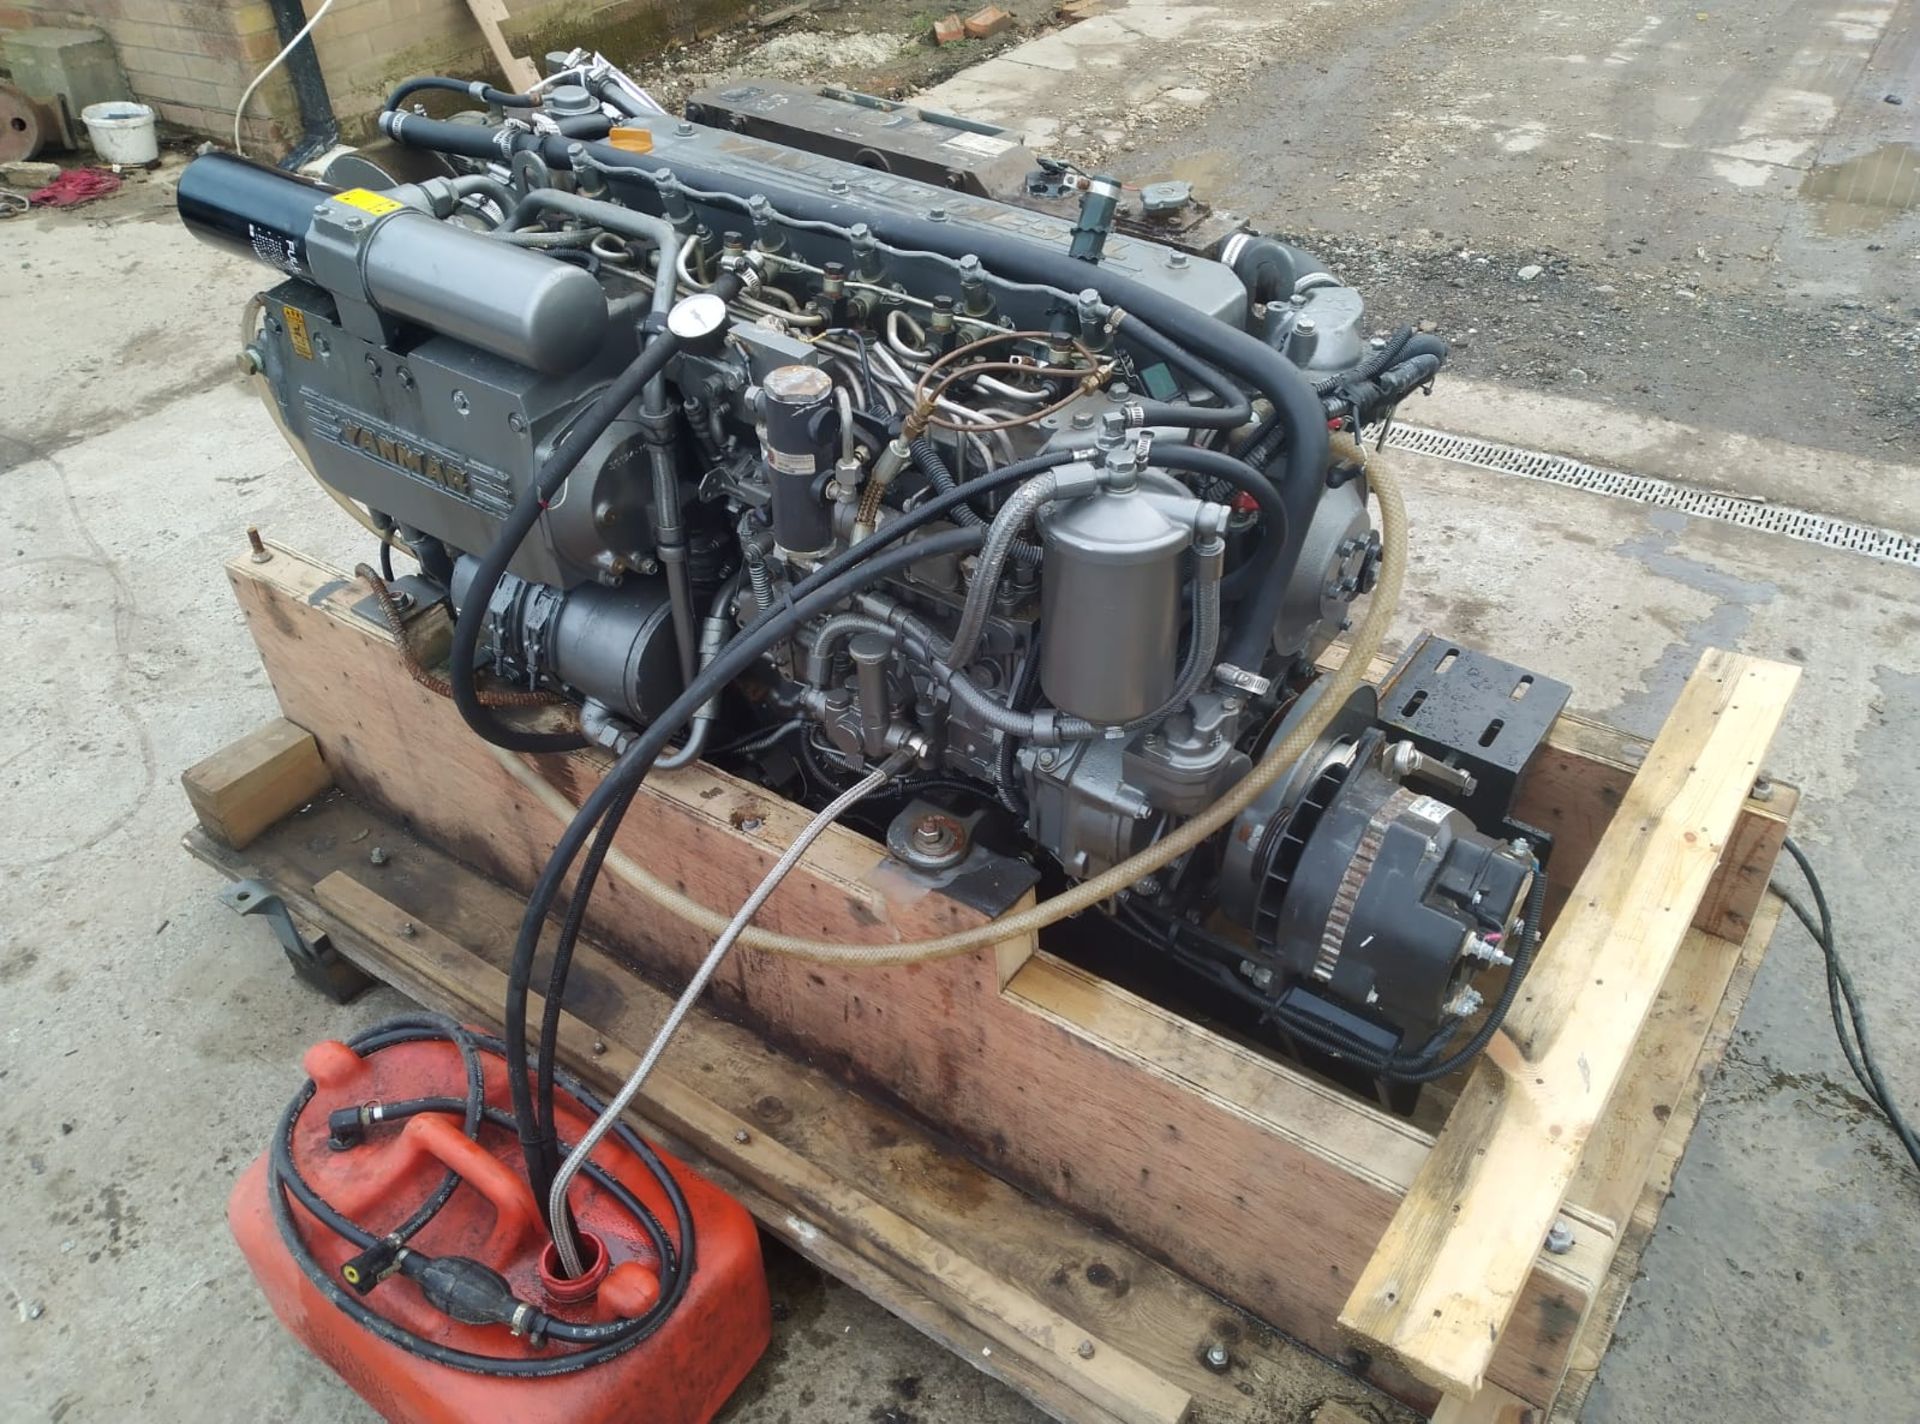 Yanmar RCD-6LY2X1 Diesel Boat Engine - 6LY2A-STP - 324kW (434HP) - Details in the description - Image 17 of 19